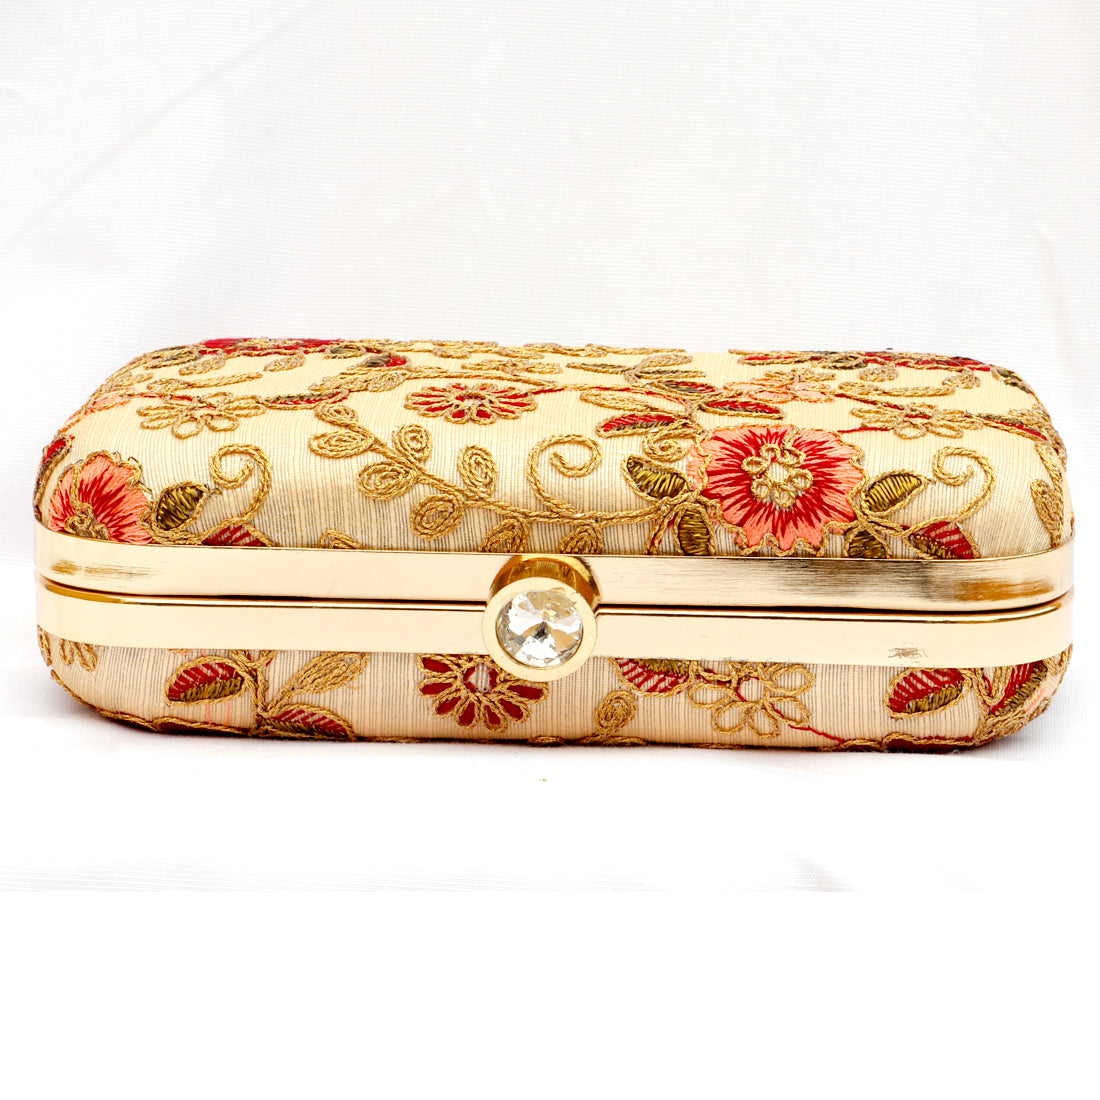 Women's Beige Color tulle Embroidered Faux Silk Clutch - VASTANS